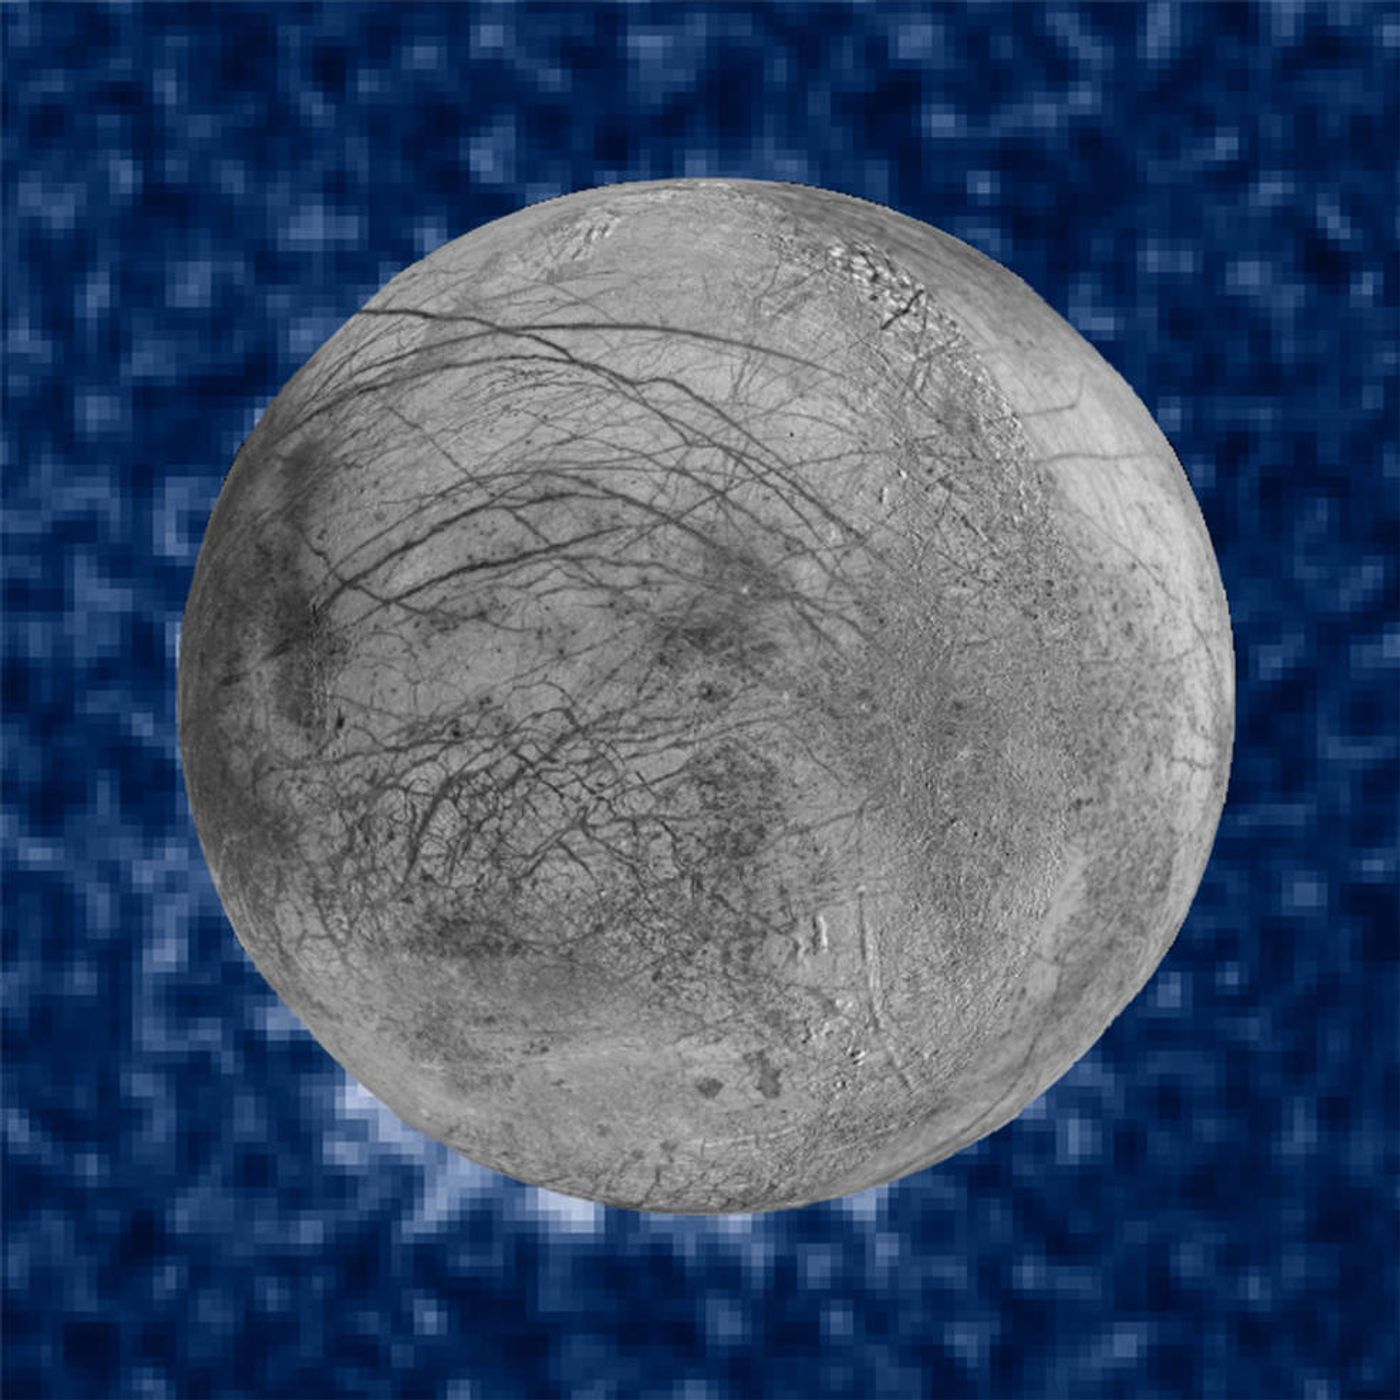 NASA's Hubble Space Telescope has reportedly spotted water plumes blasting out of Europa's surface and into space.